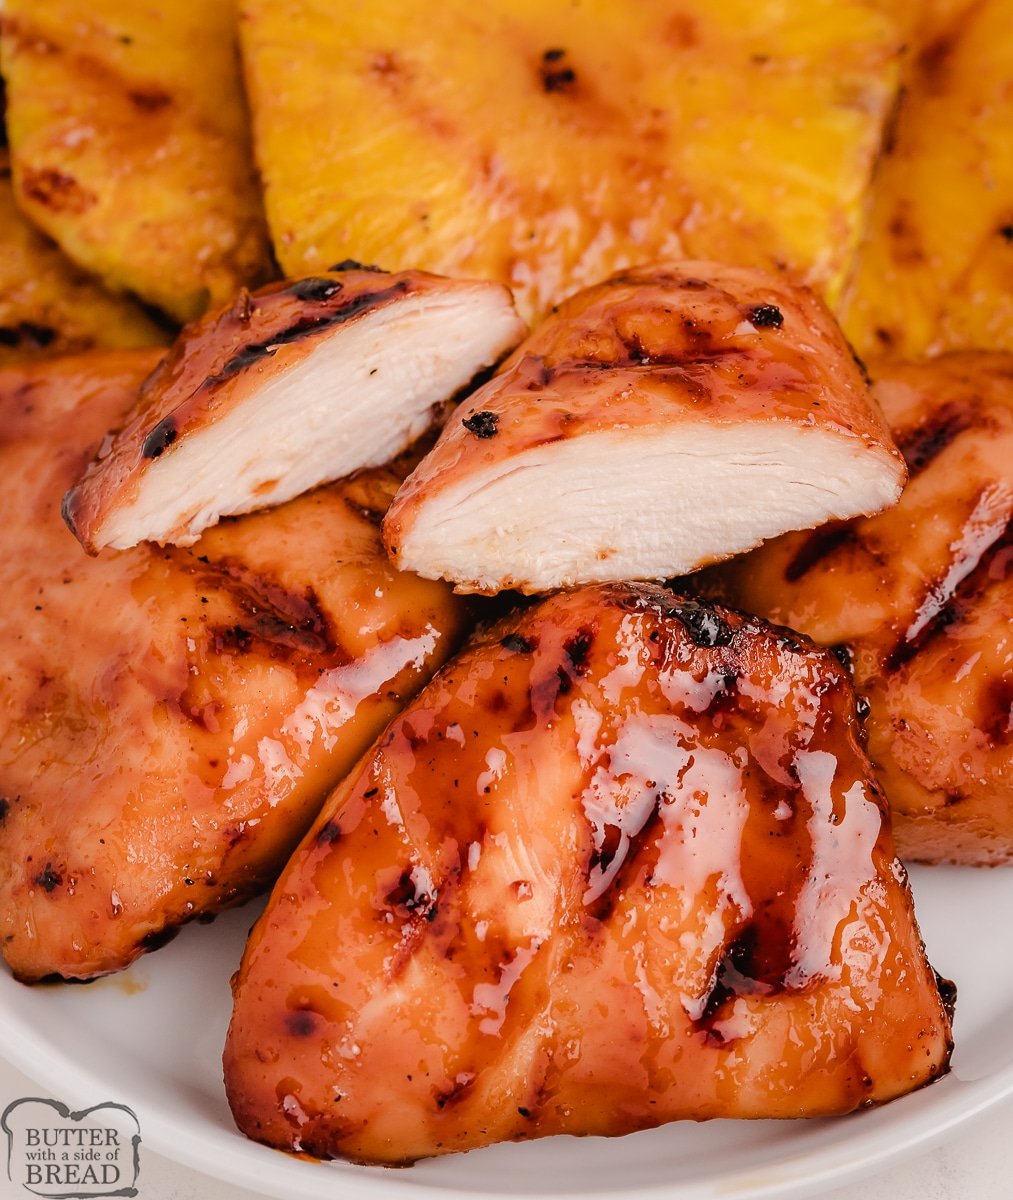 slice of grilled chicken with a sweet spicy marinade